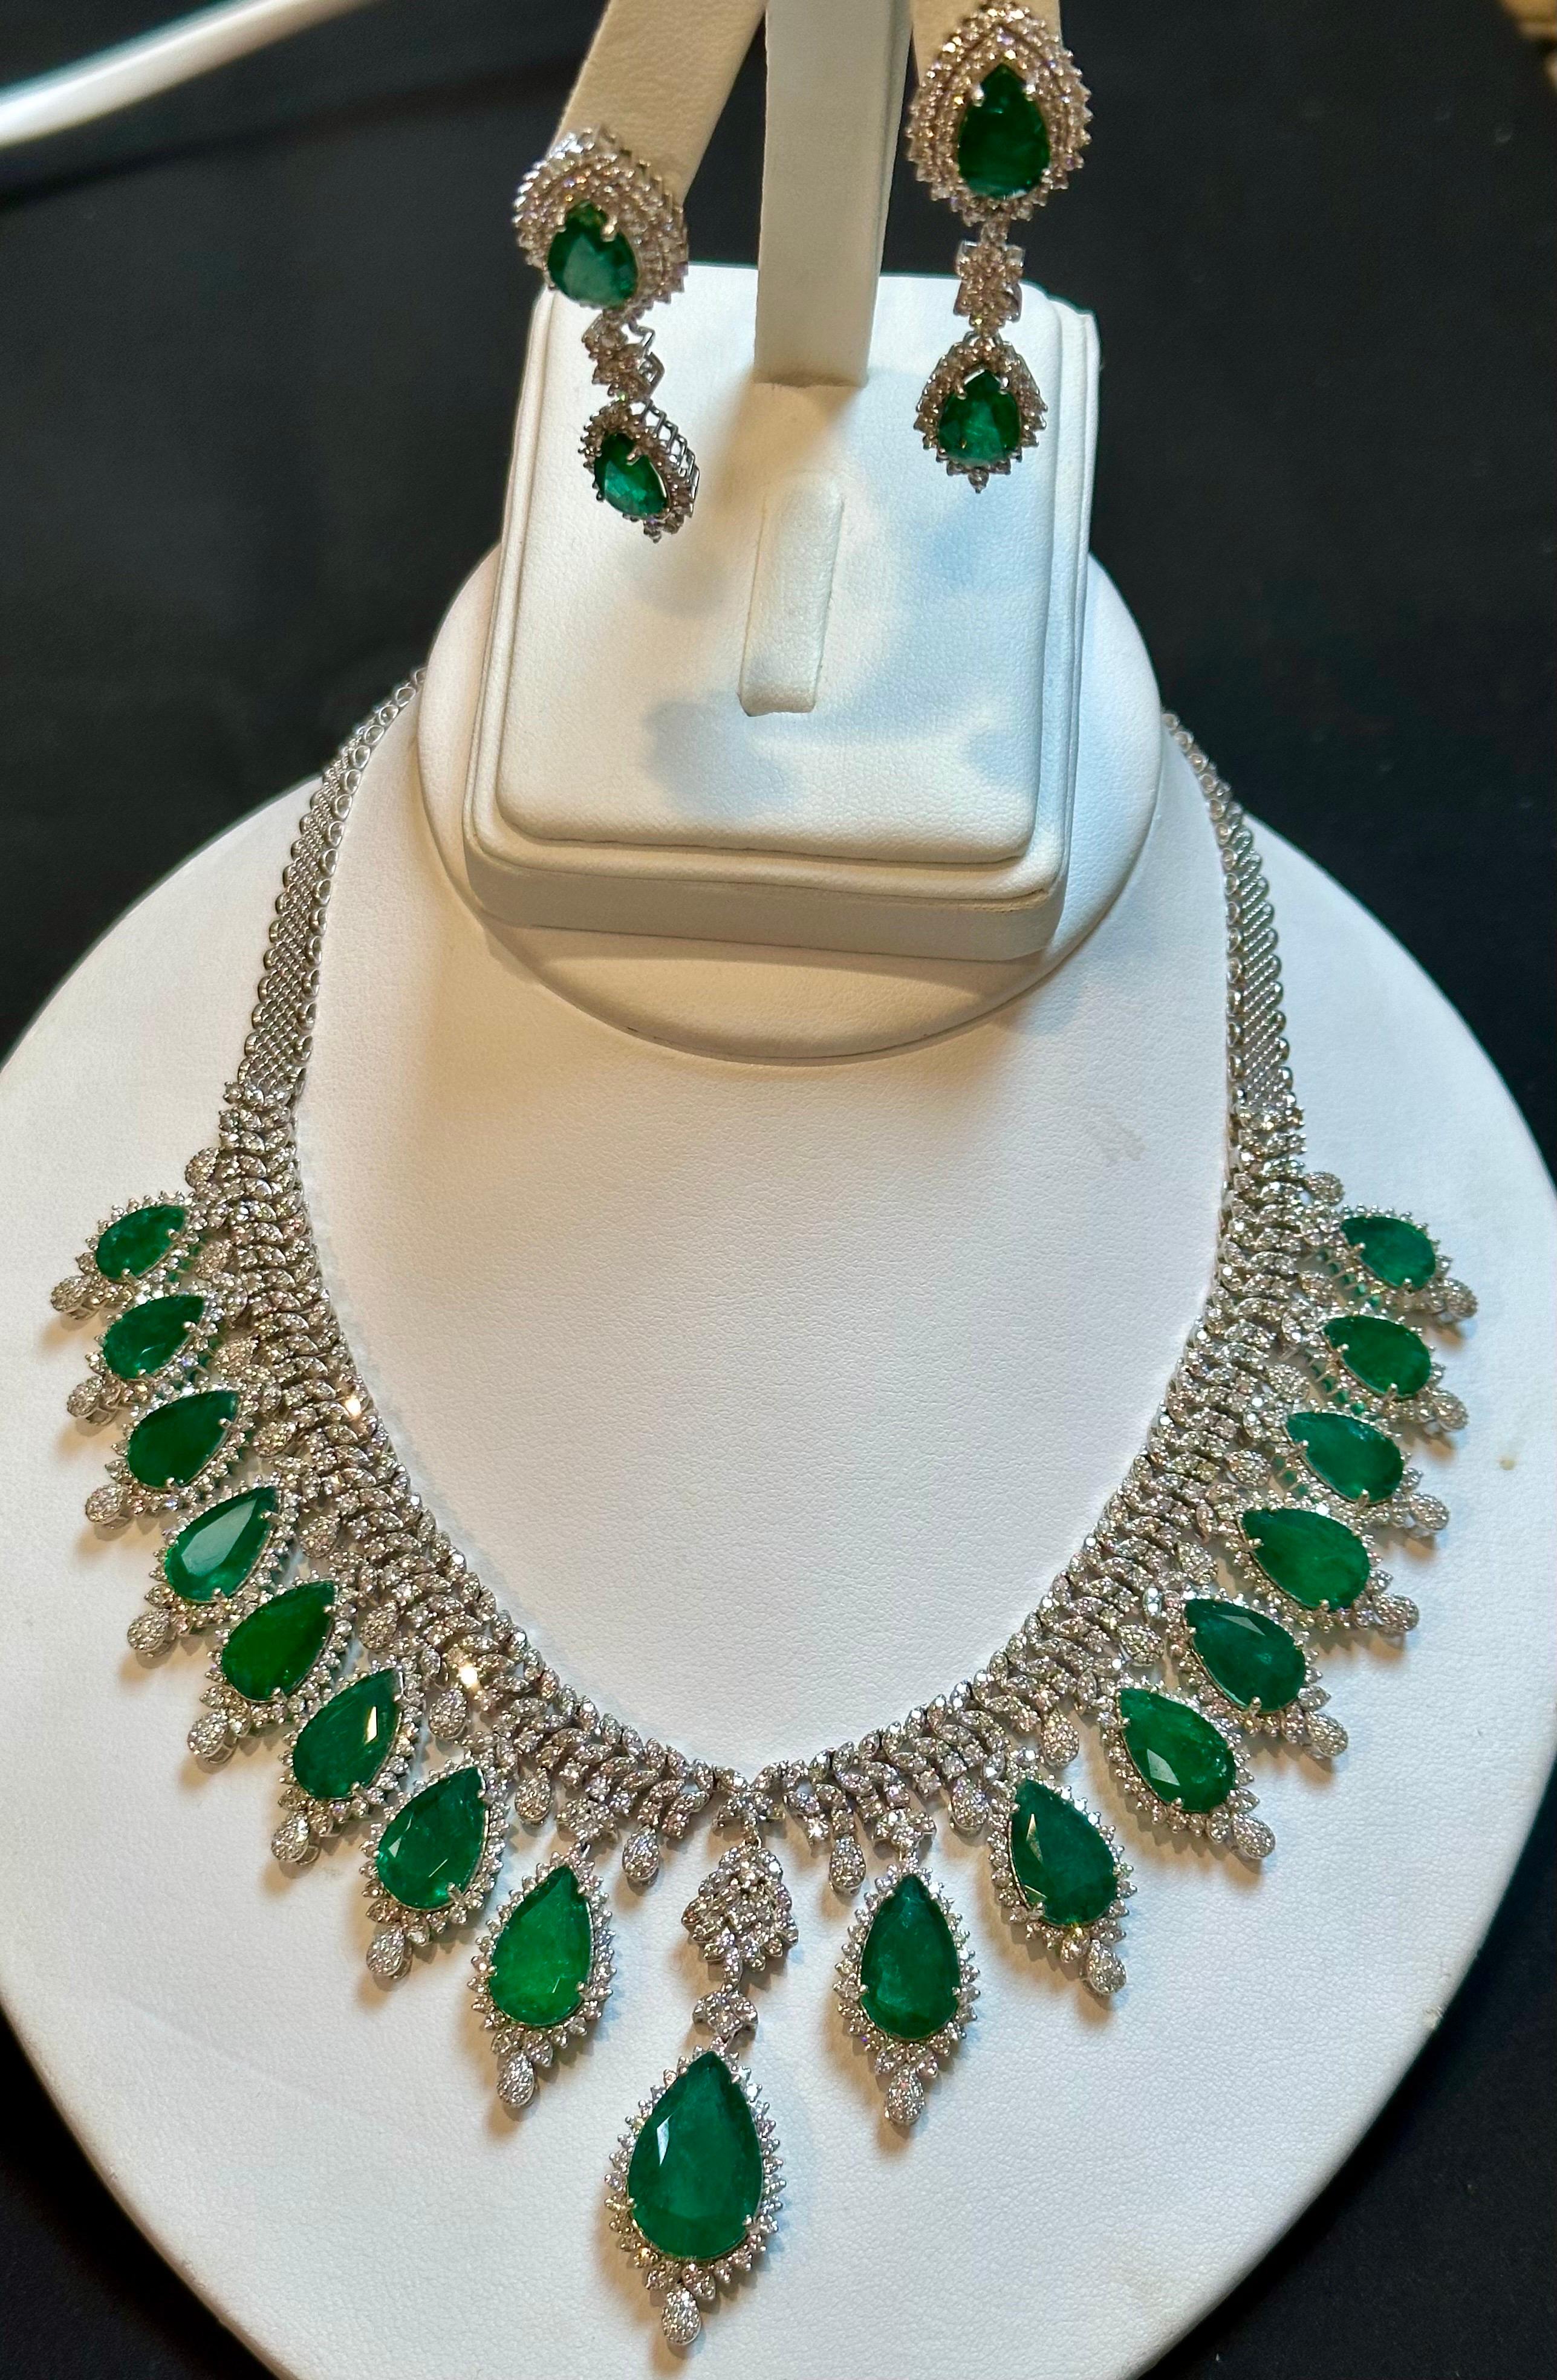 73ct Zambian Emerald and 22ct Diamond Necklace and Earring Bridal Suite For Sale 3